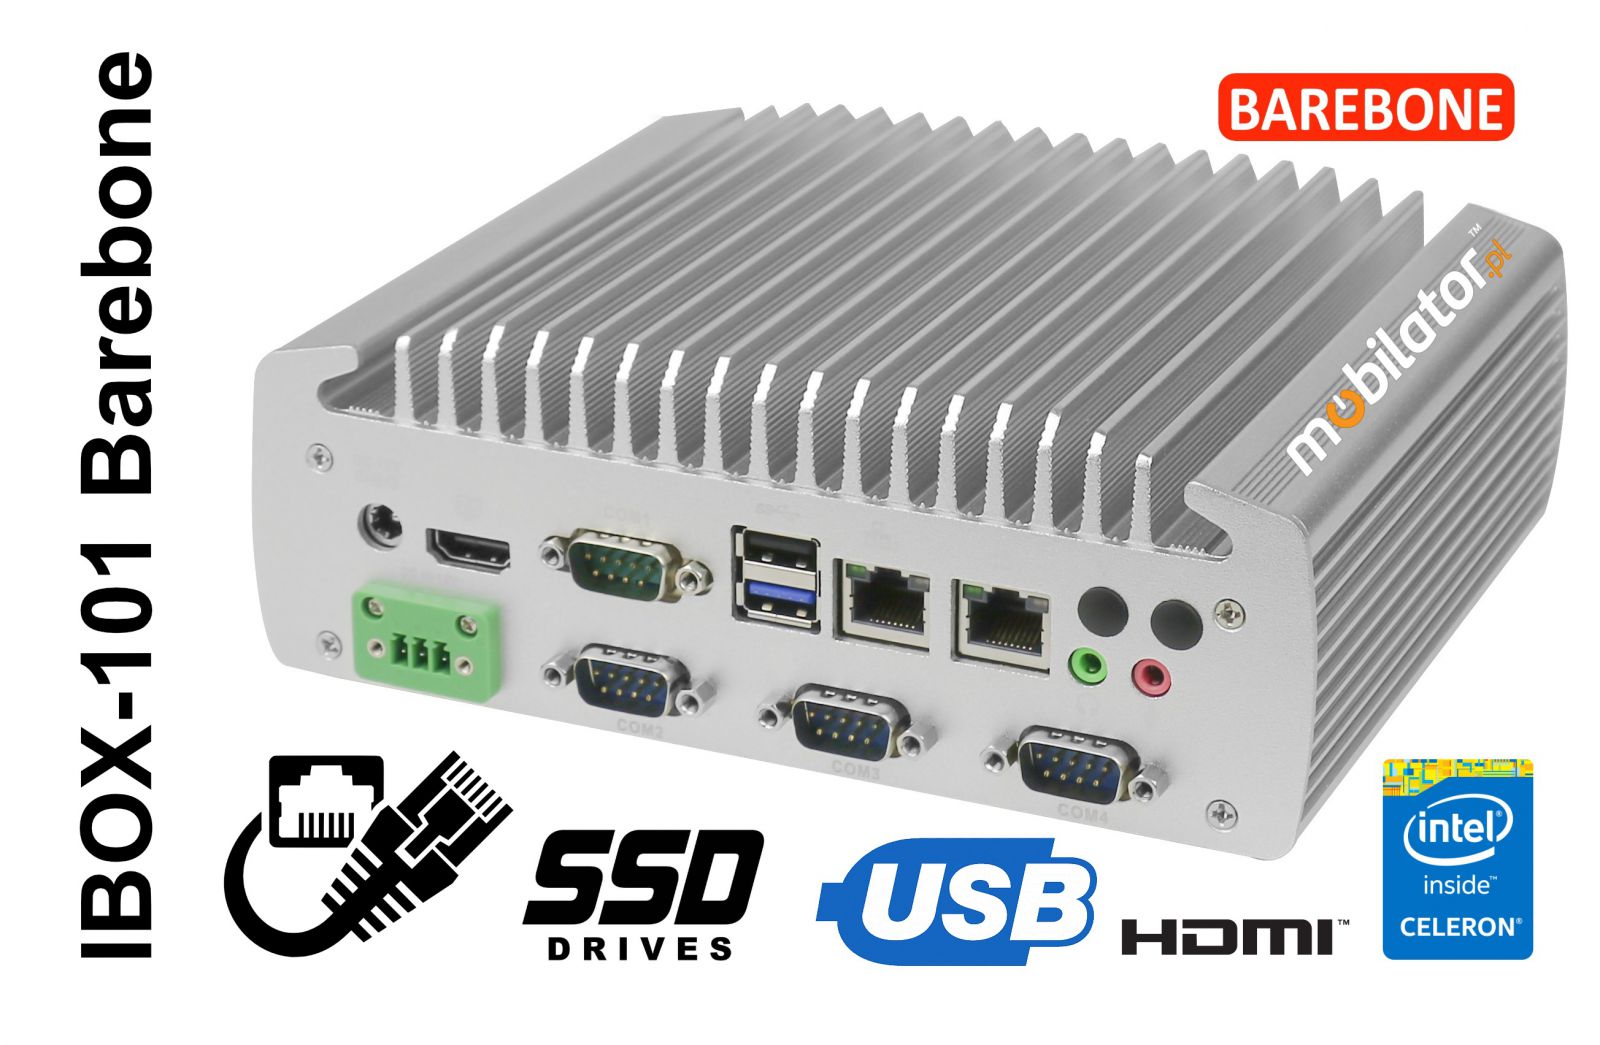 IBOX-101 Industrial computer for warehouse applications with WiFi 3G 4G 6x COM module